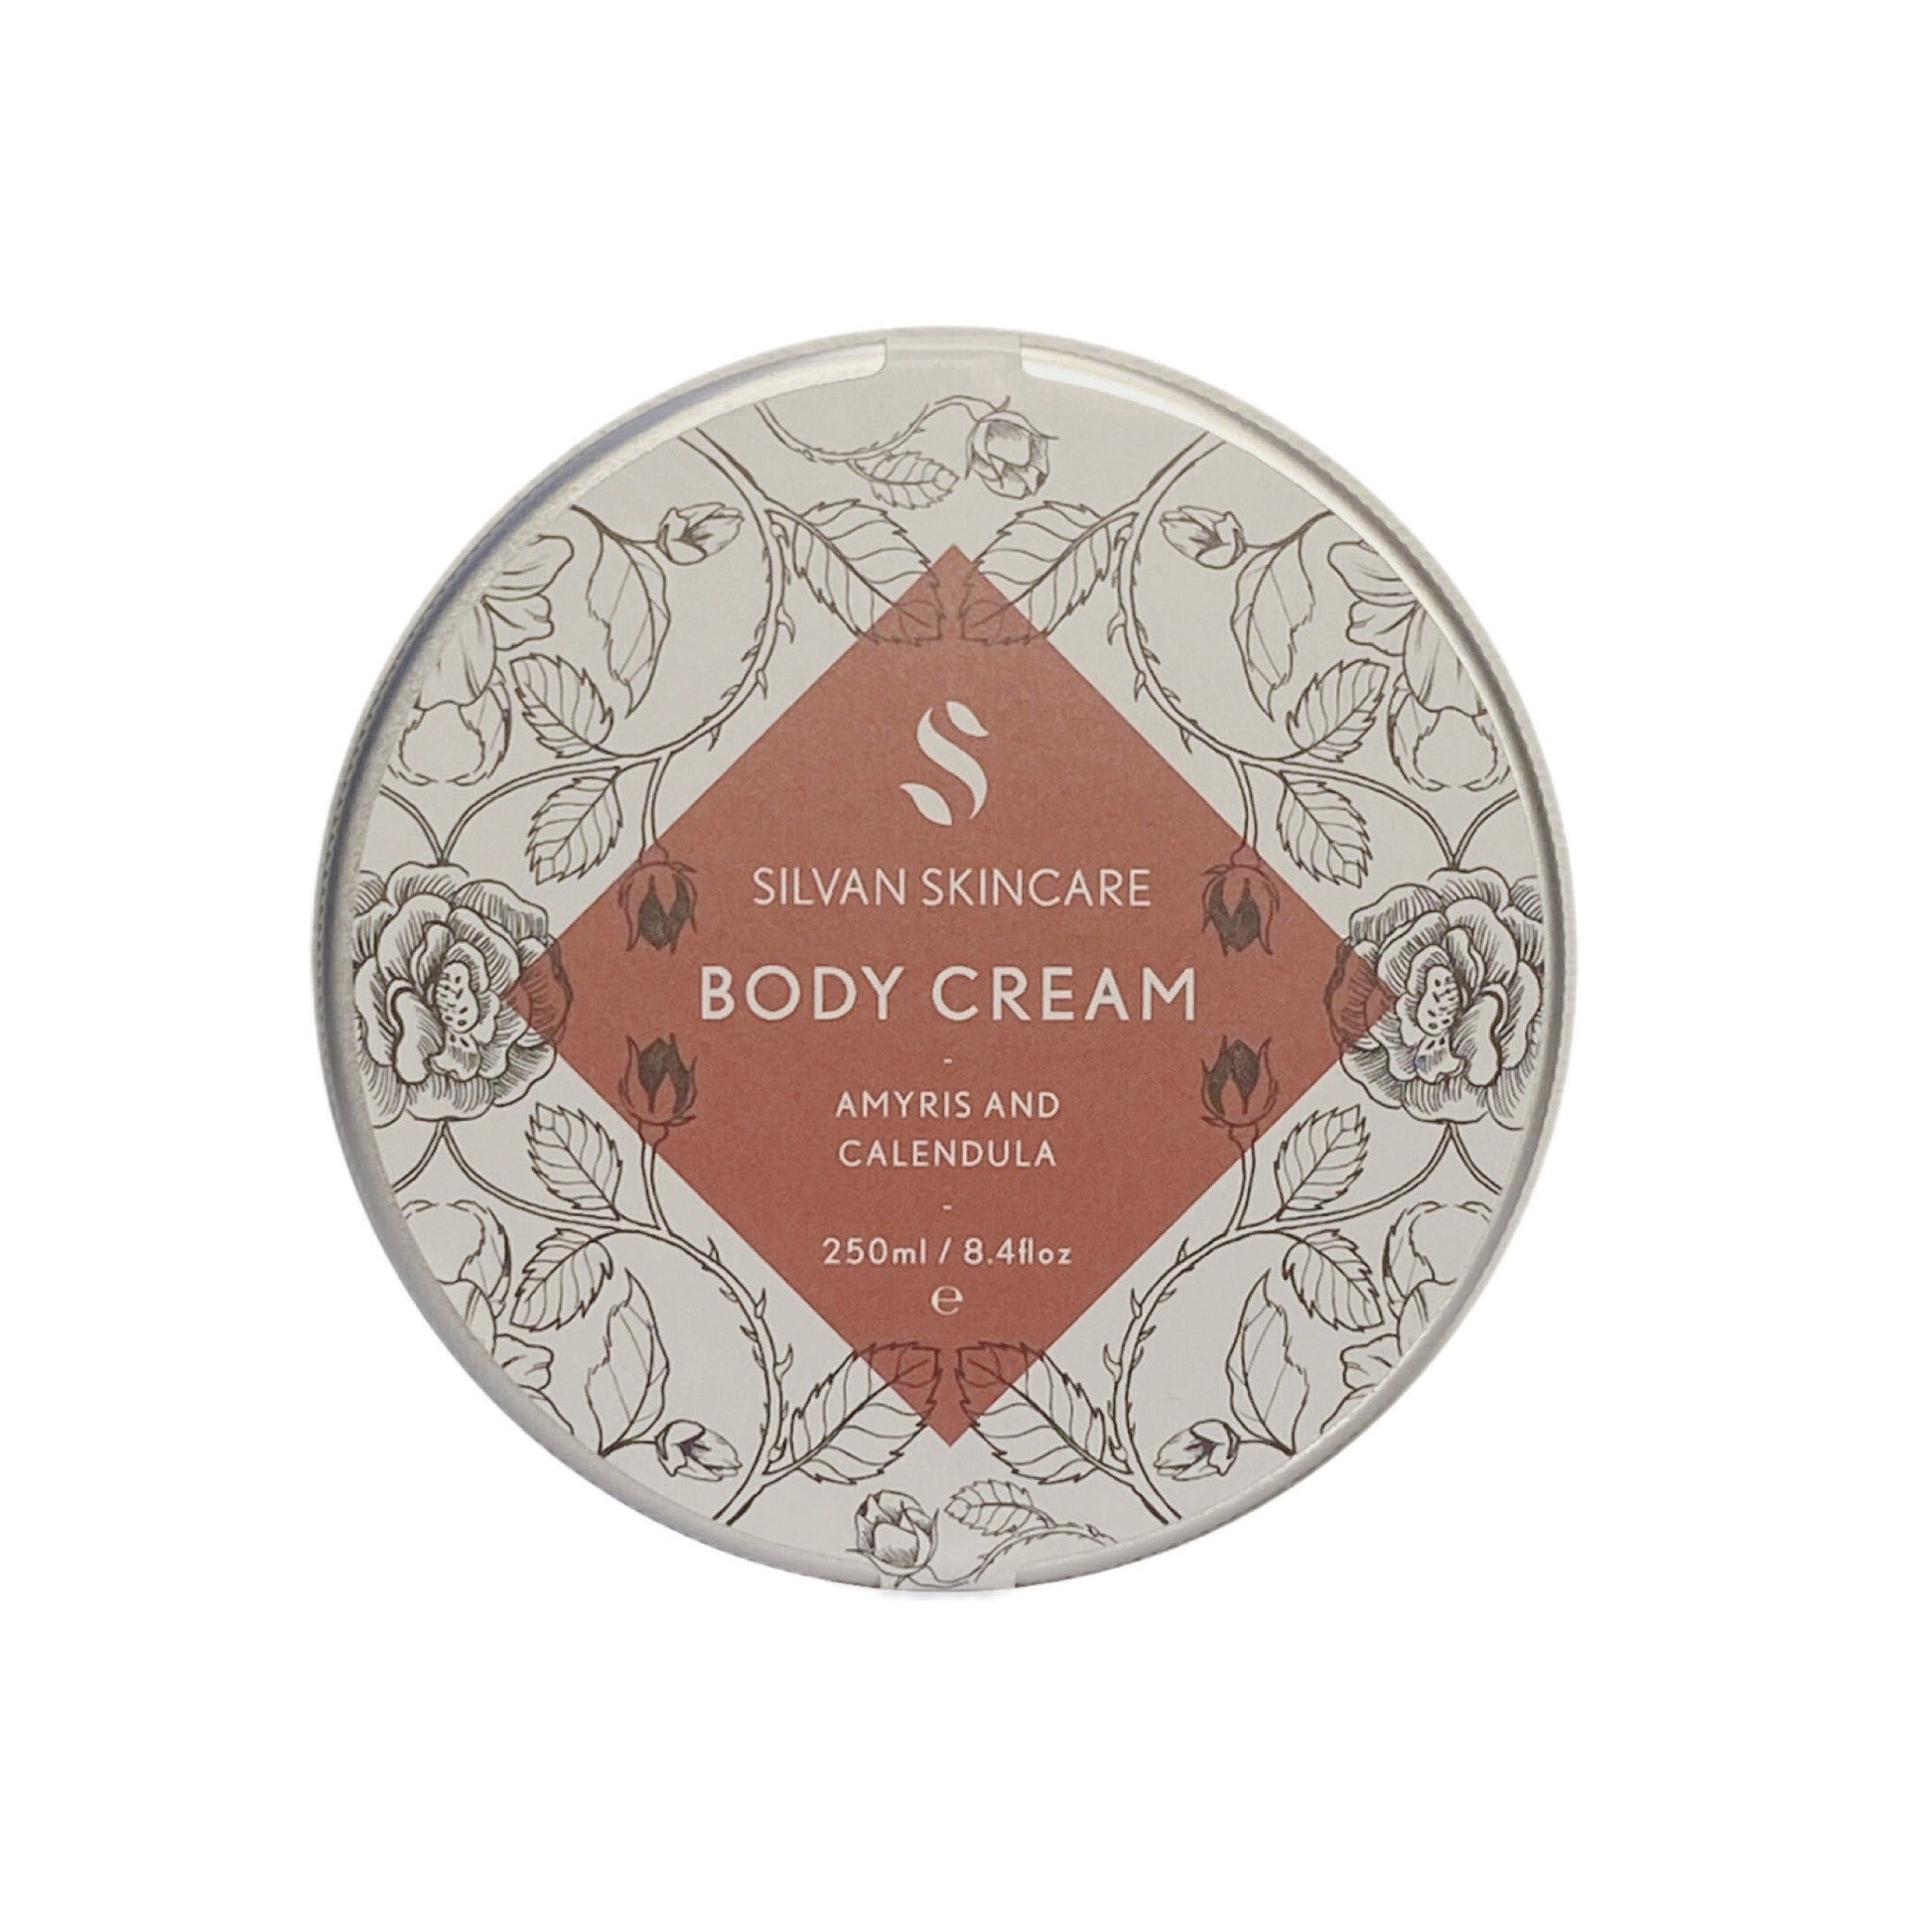 aluminium tin filled with a creamy body moisturiser inside. the label on the tin features etches of the natural ingredients within the body cream and a dusky red diamond shape which has white text stating the name of the product silvan skincare body cream with amyris and calendula